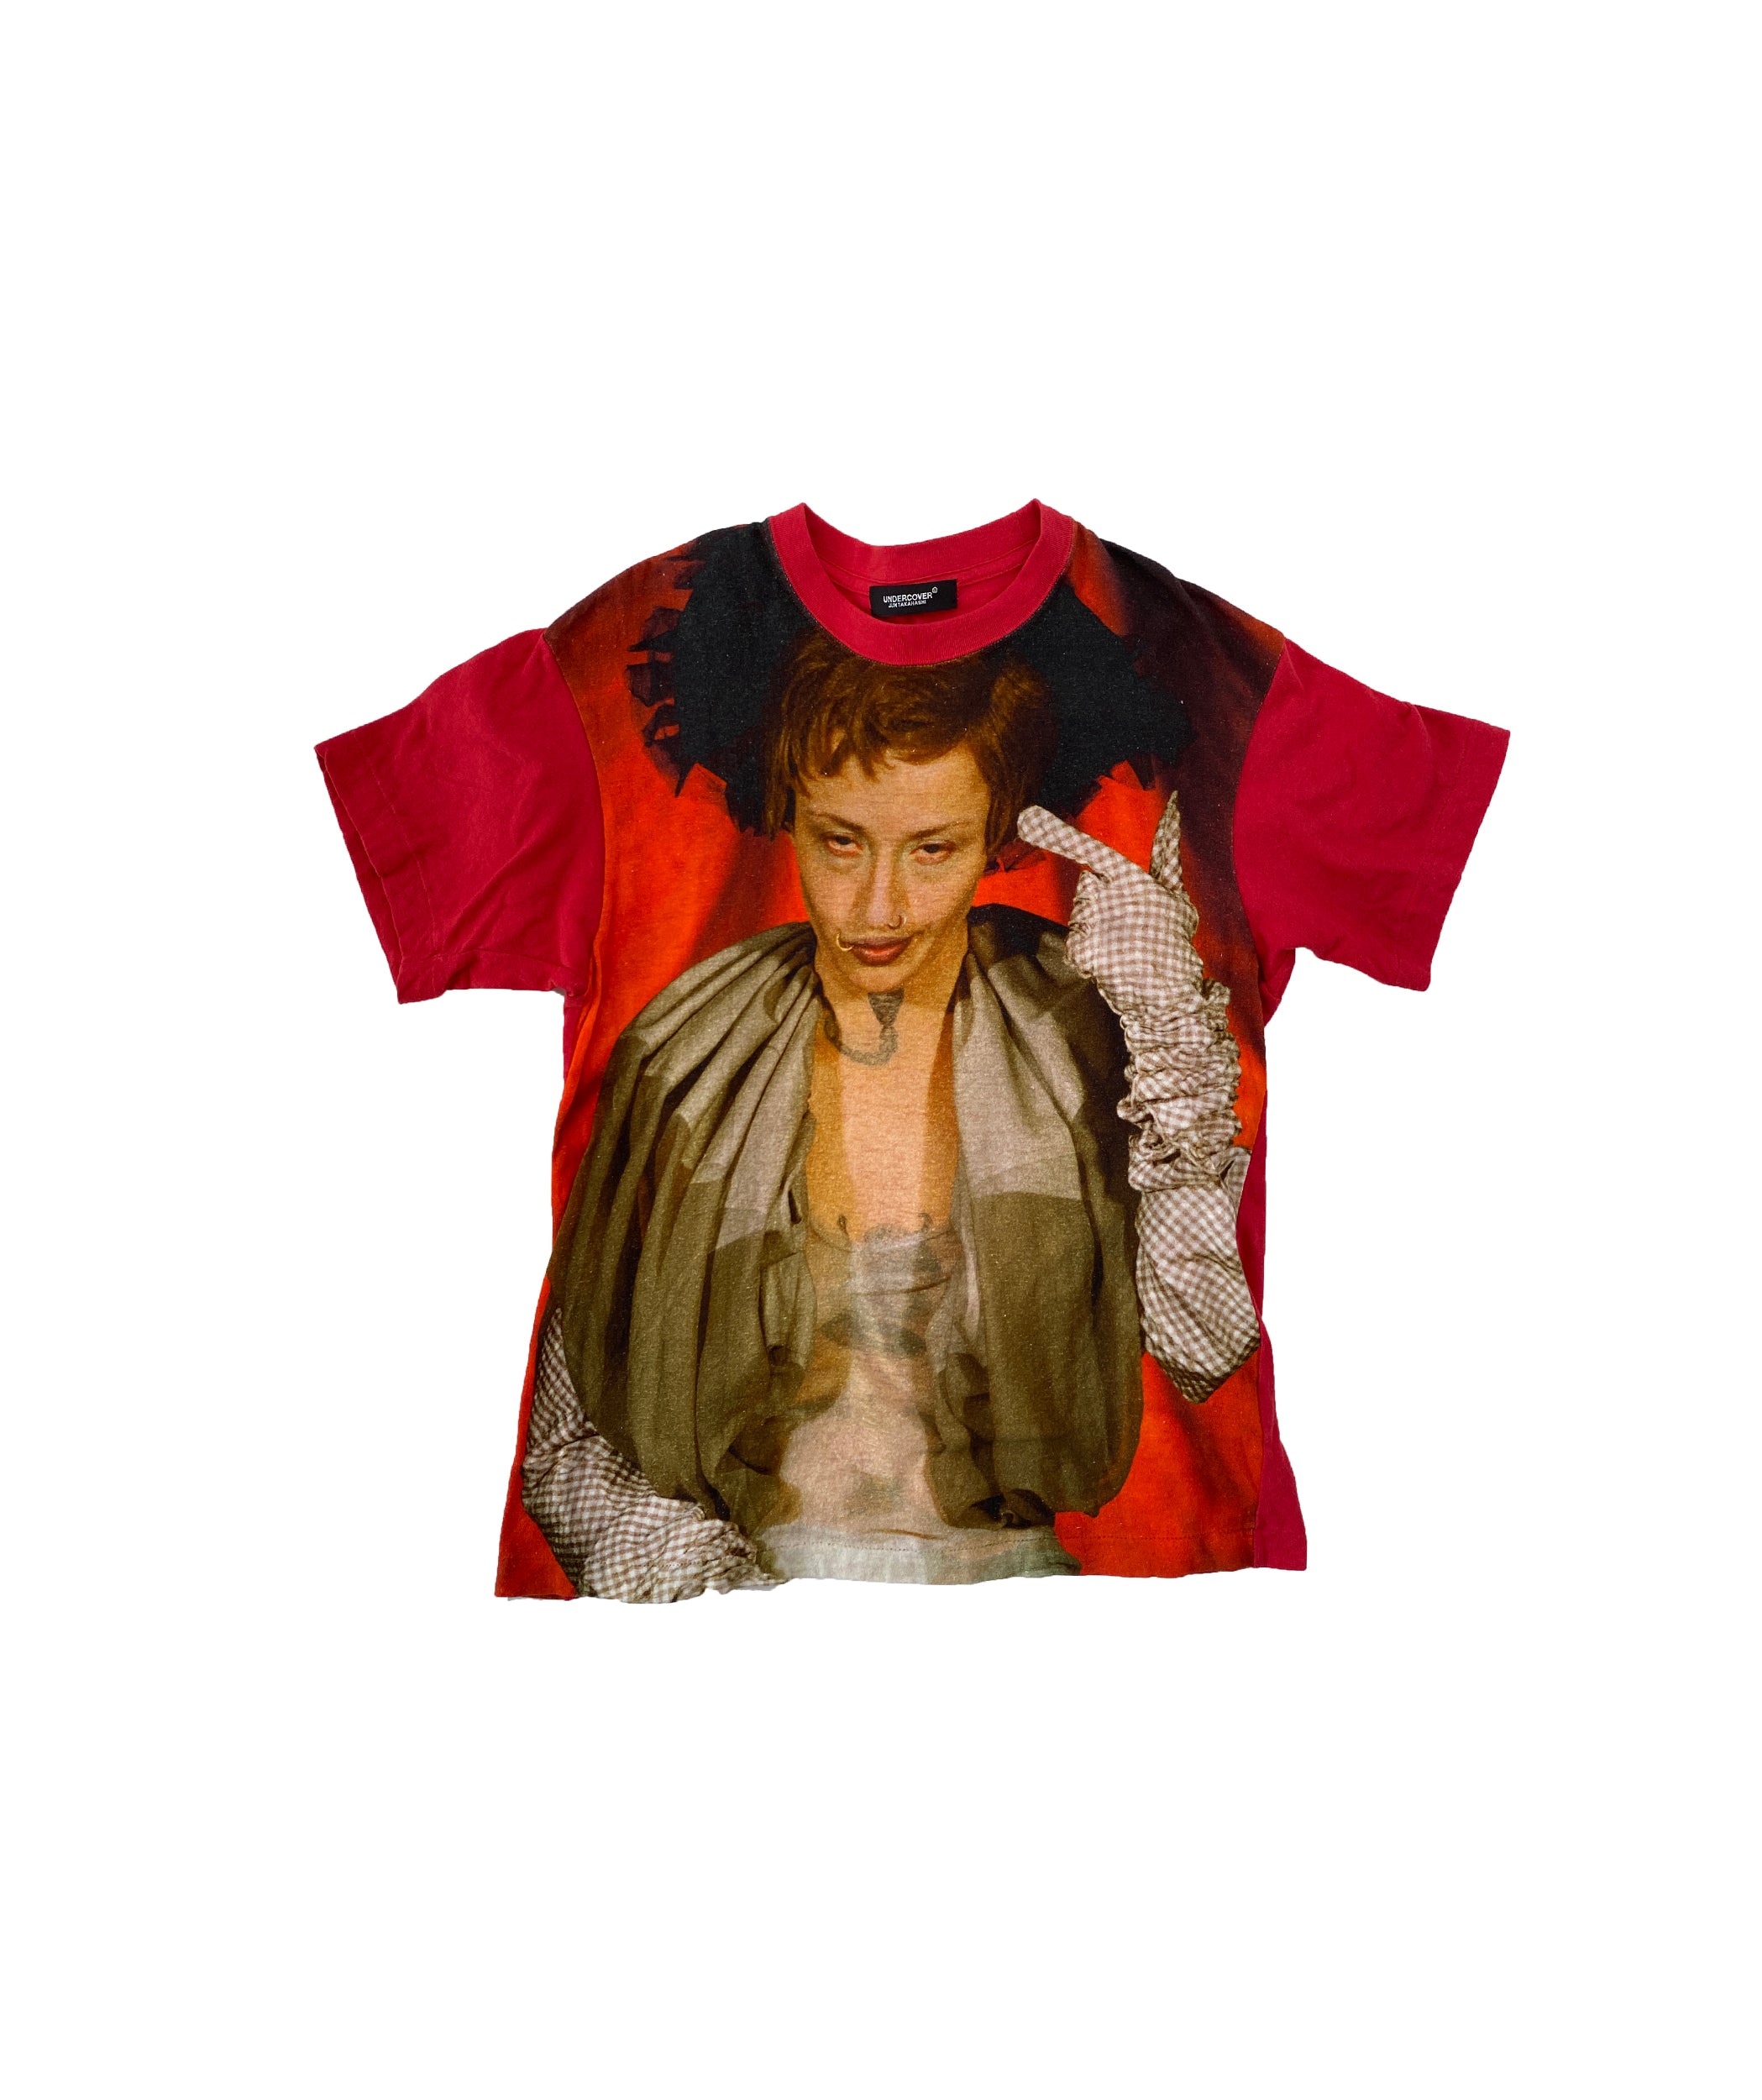 UNDERCOVER Cindy Sherman Tee M